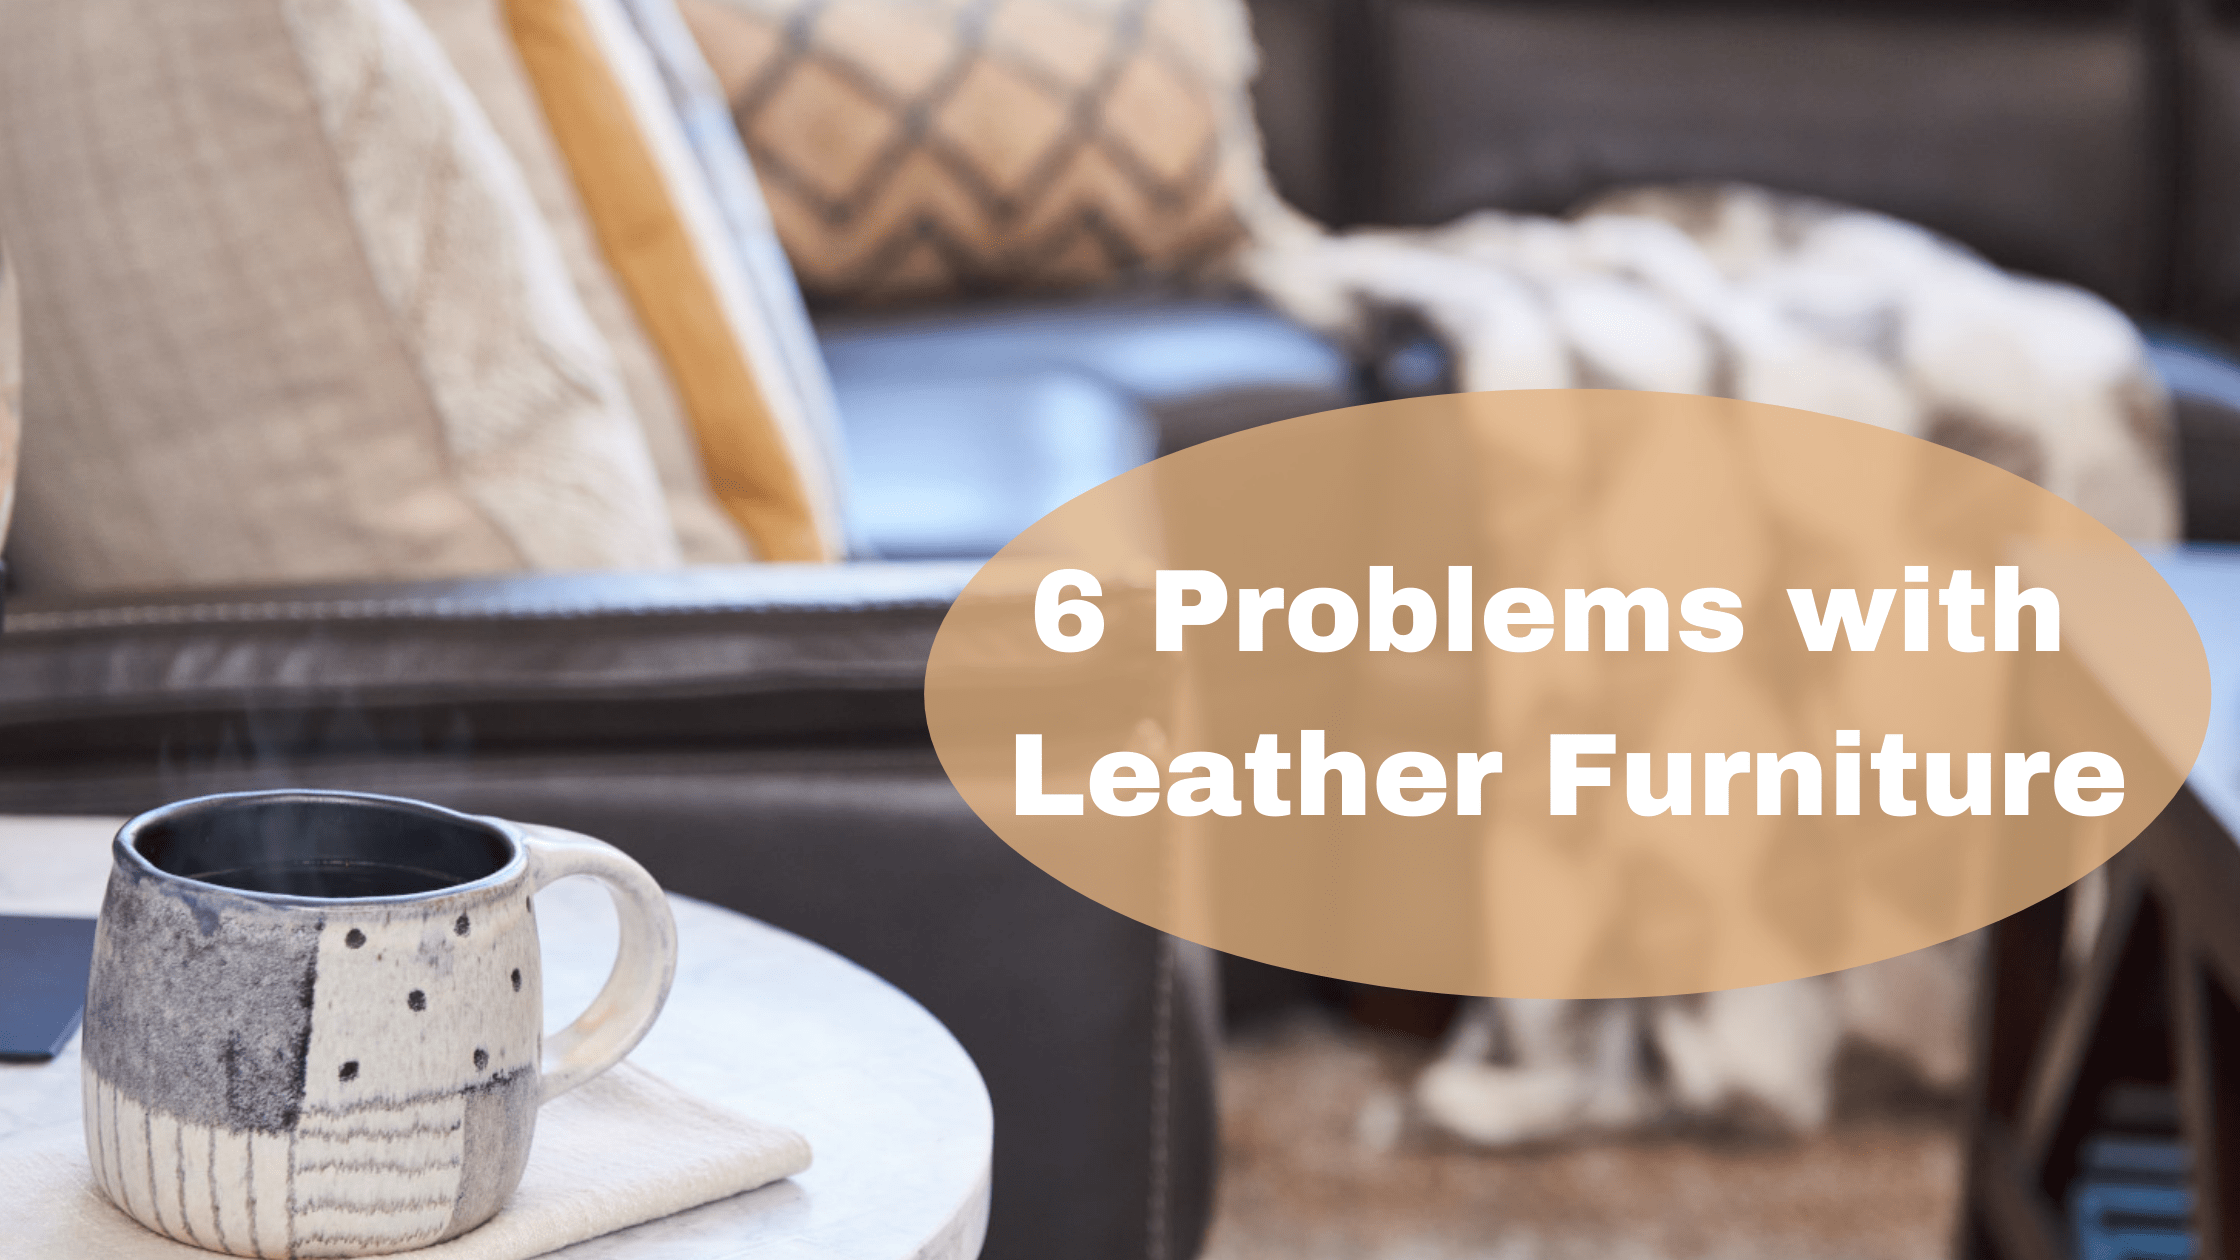 Common Problems With Leather Furniture, Is Leather Furniture Good